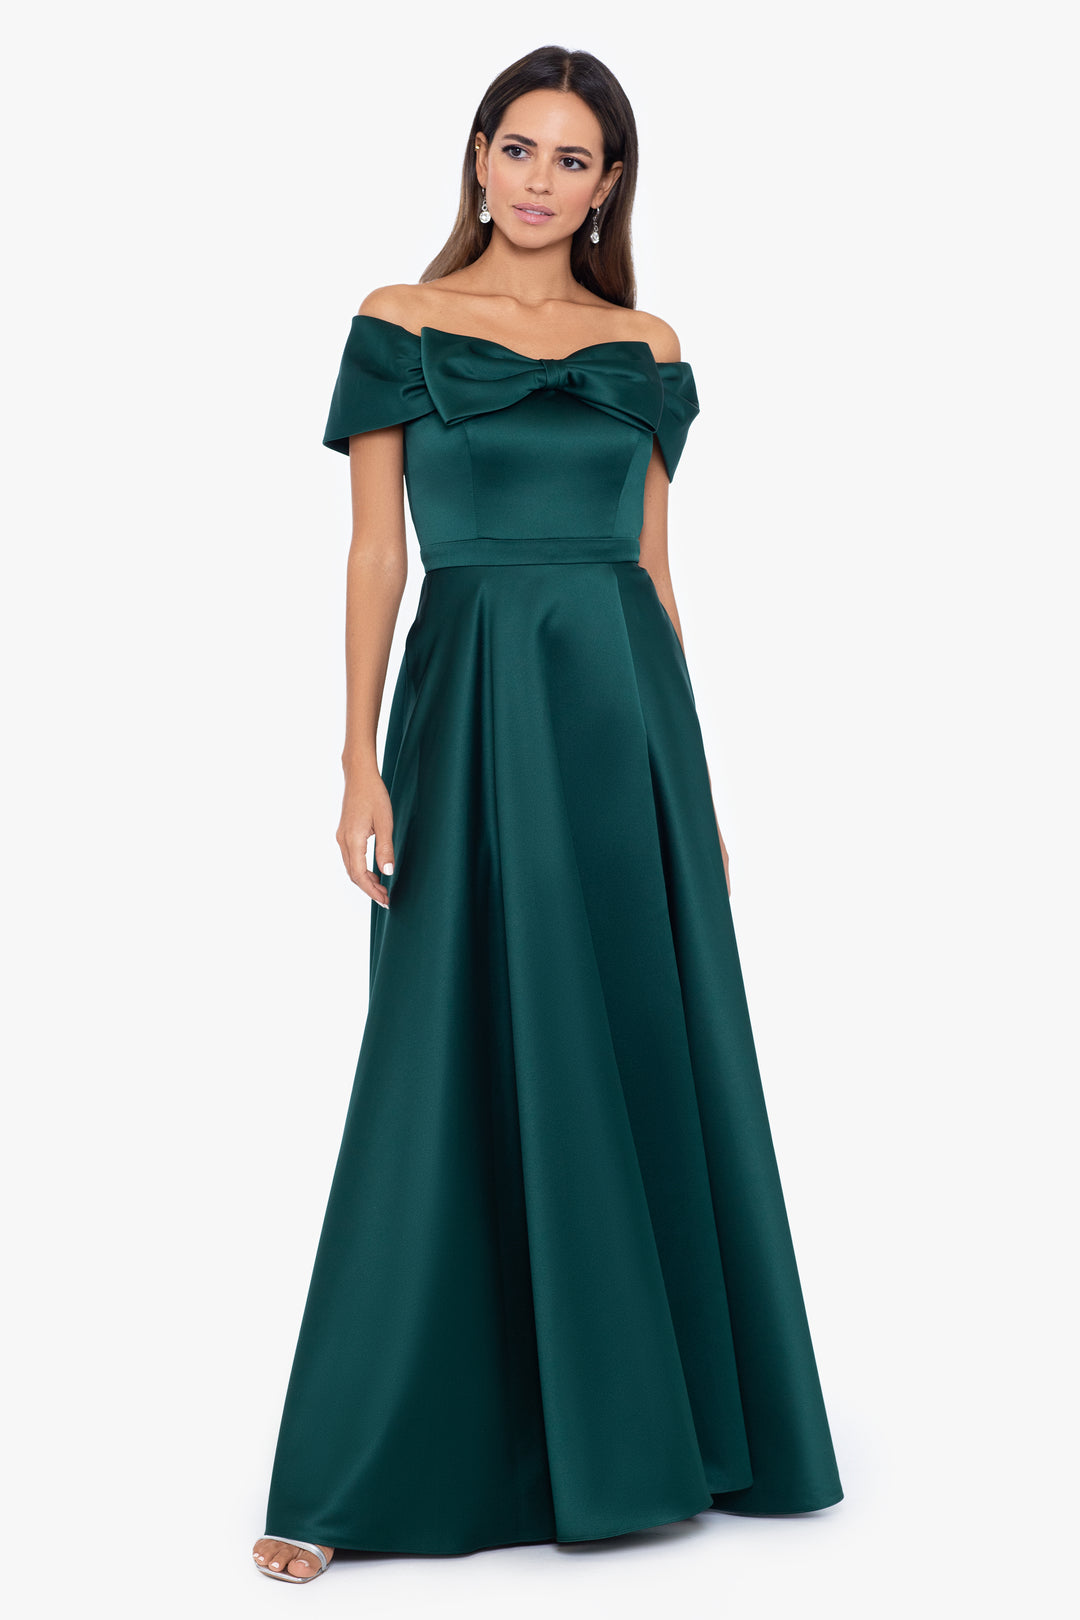 "Sydney" Long Lamour Off the Shoulder Bow Ball Gown